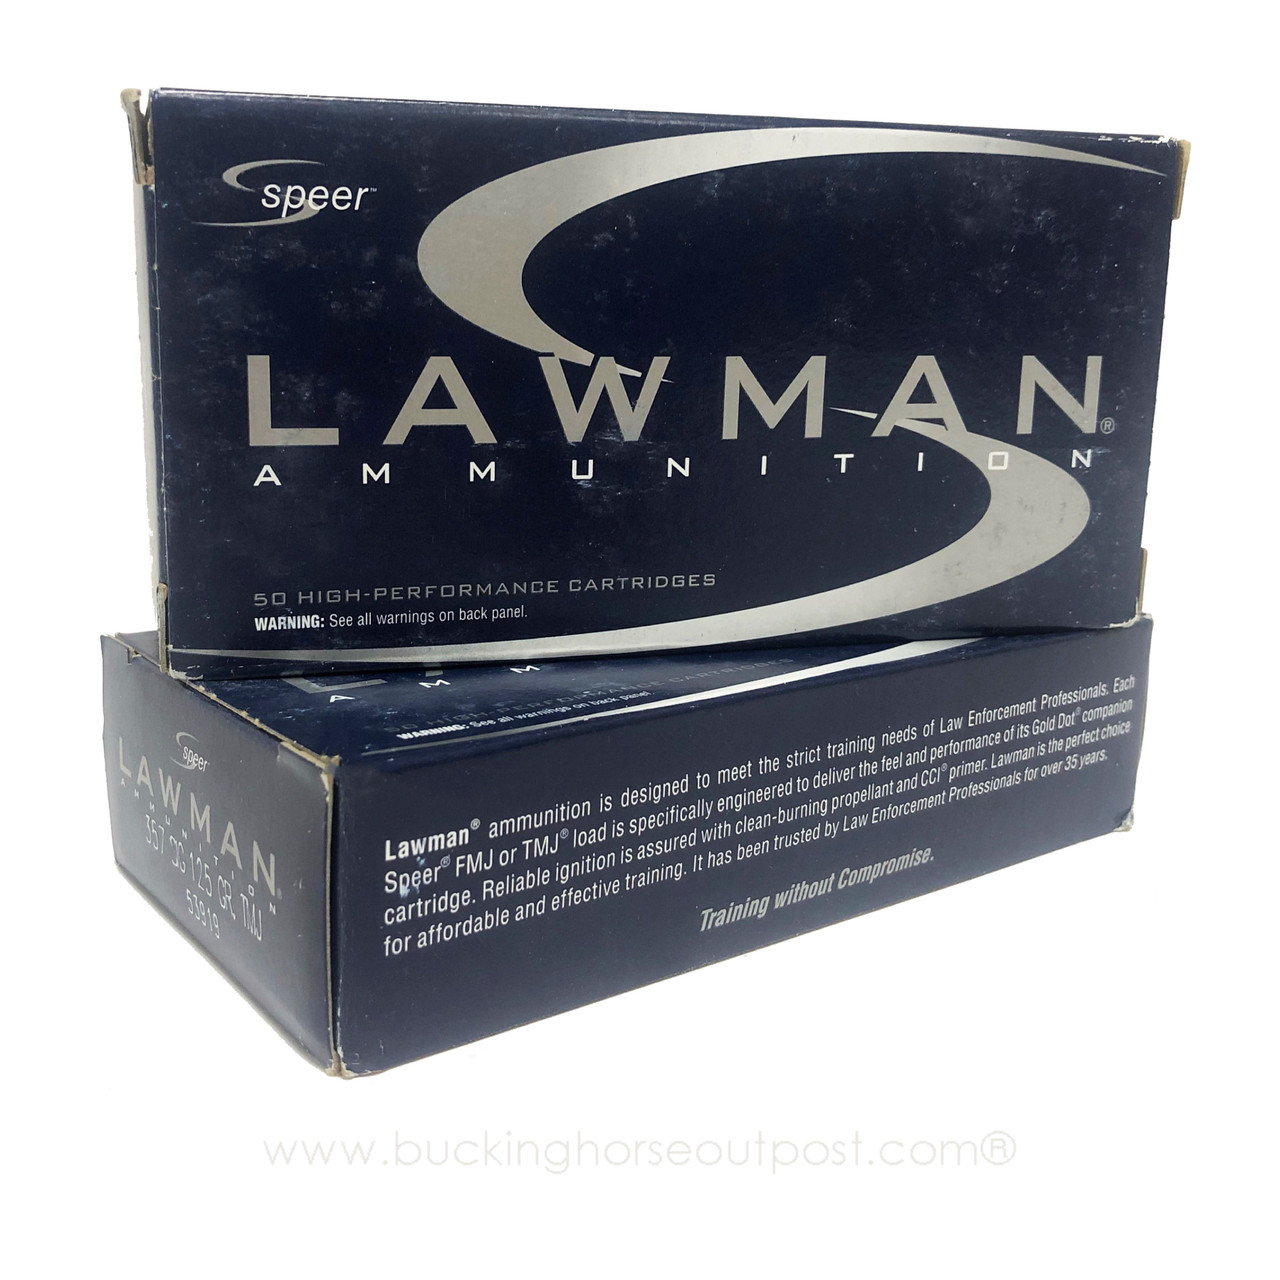 Speer Lawman .357 Sig 125 Grain Total Metal Jacket 50rds Per Box (53919)- FREE SHIPPING ON ORDERS OVER $175